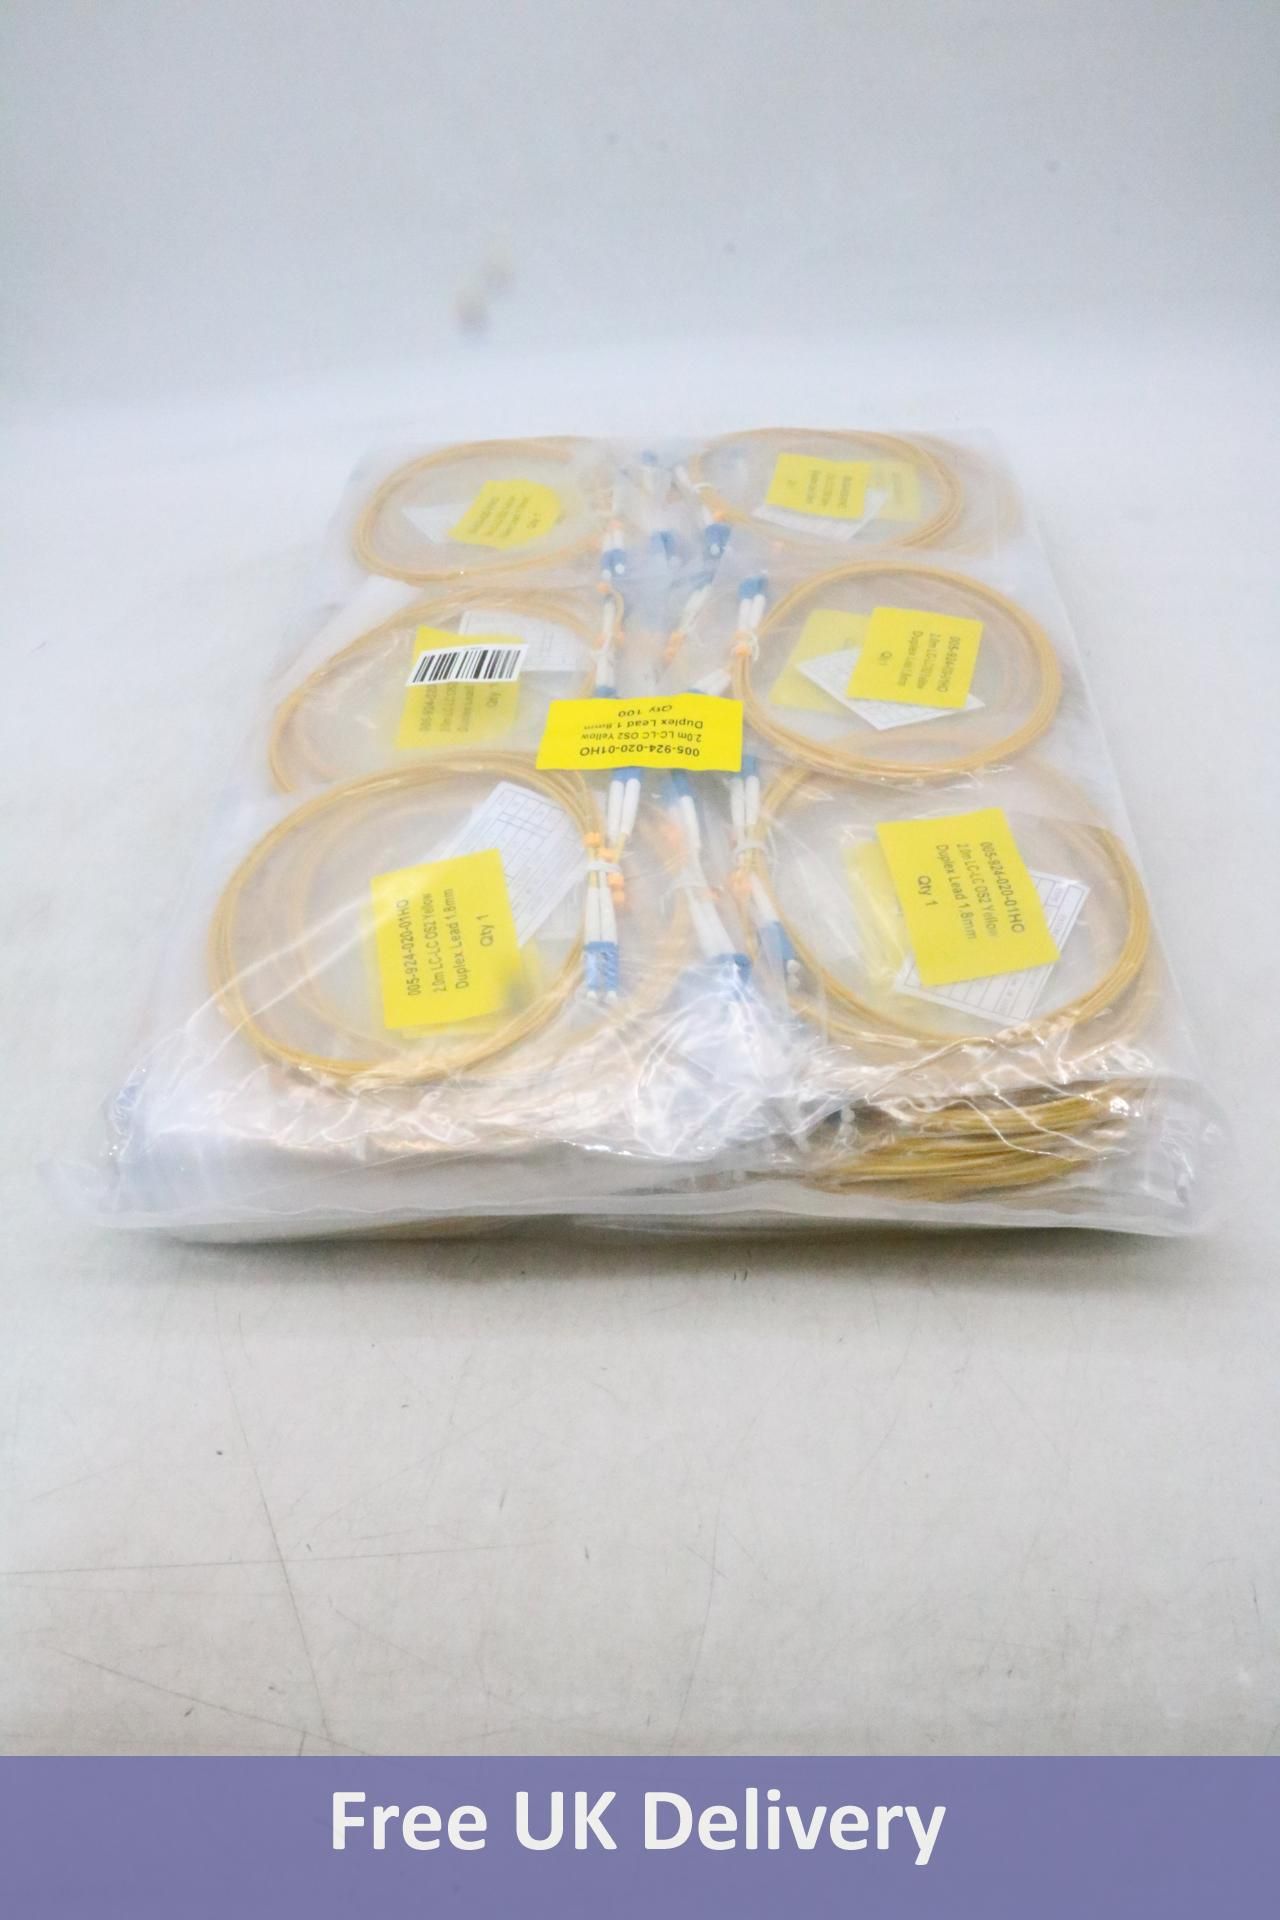 One-hundred Duplex OS2 Single Mode PVC 1.8mm, Fiber Optic Patch Cables, 2.0m, Yellow